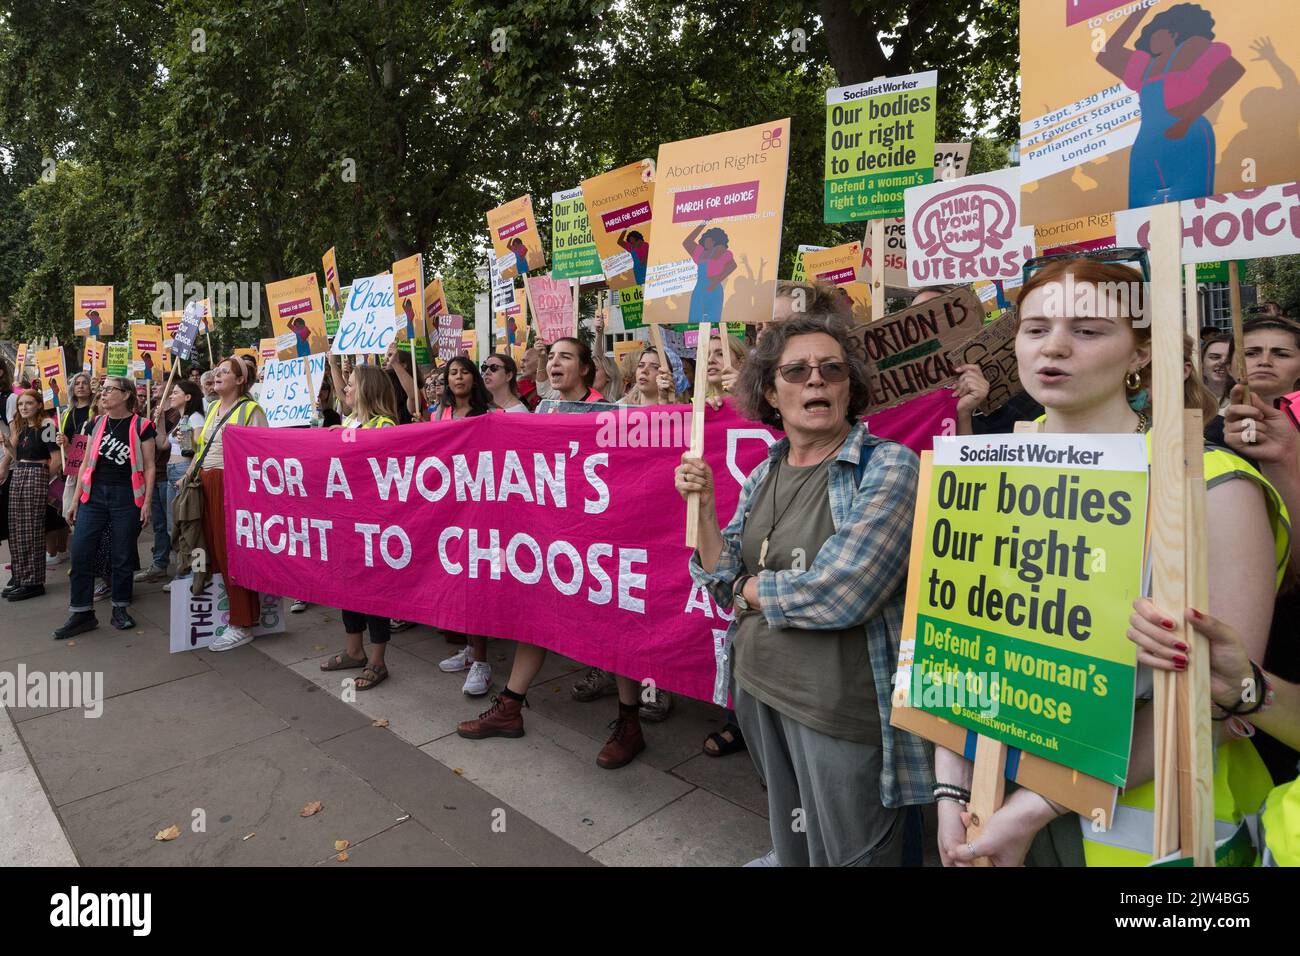 London, UK. 3rd September, 2022. Pro-choice supporters stage a demonstration in Parliament Square to campaign for women's reproductive rights around the world as a counter-protest to the anti-abortion 'March for Life'  taking place alongside. The demonstrators also expressed solidarity with women in US where the Supreme Court overturned the 1973 Roe v Wade law, which affirmed the federal constitutional right to seek an abortion. Credit: Wiktor Szymanowicz/Alamy Live News Stock Photo